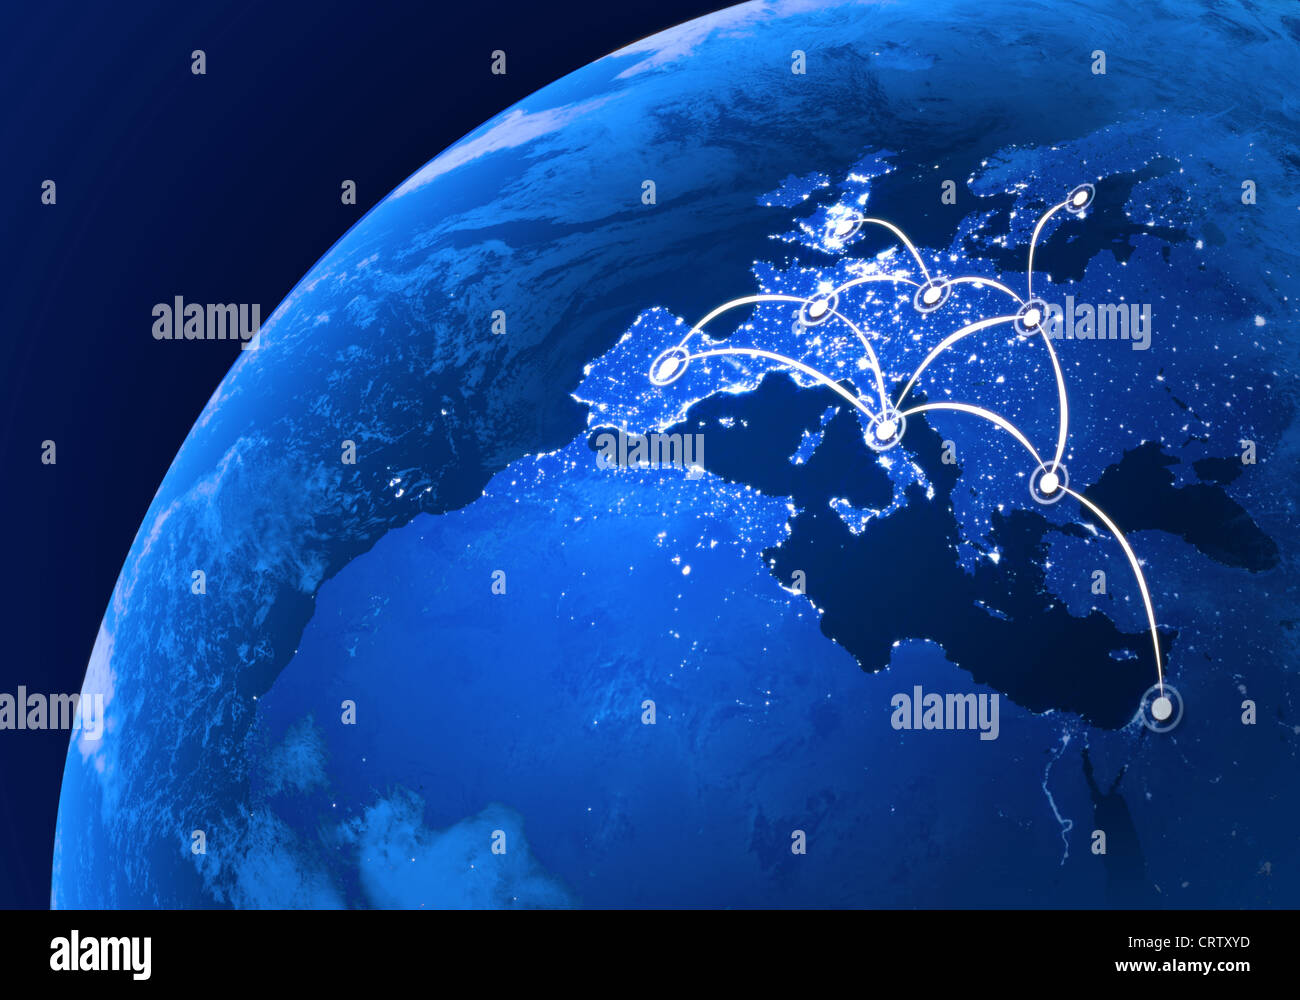 European telecomunication or air travel connections concept illustration Stock Photo